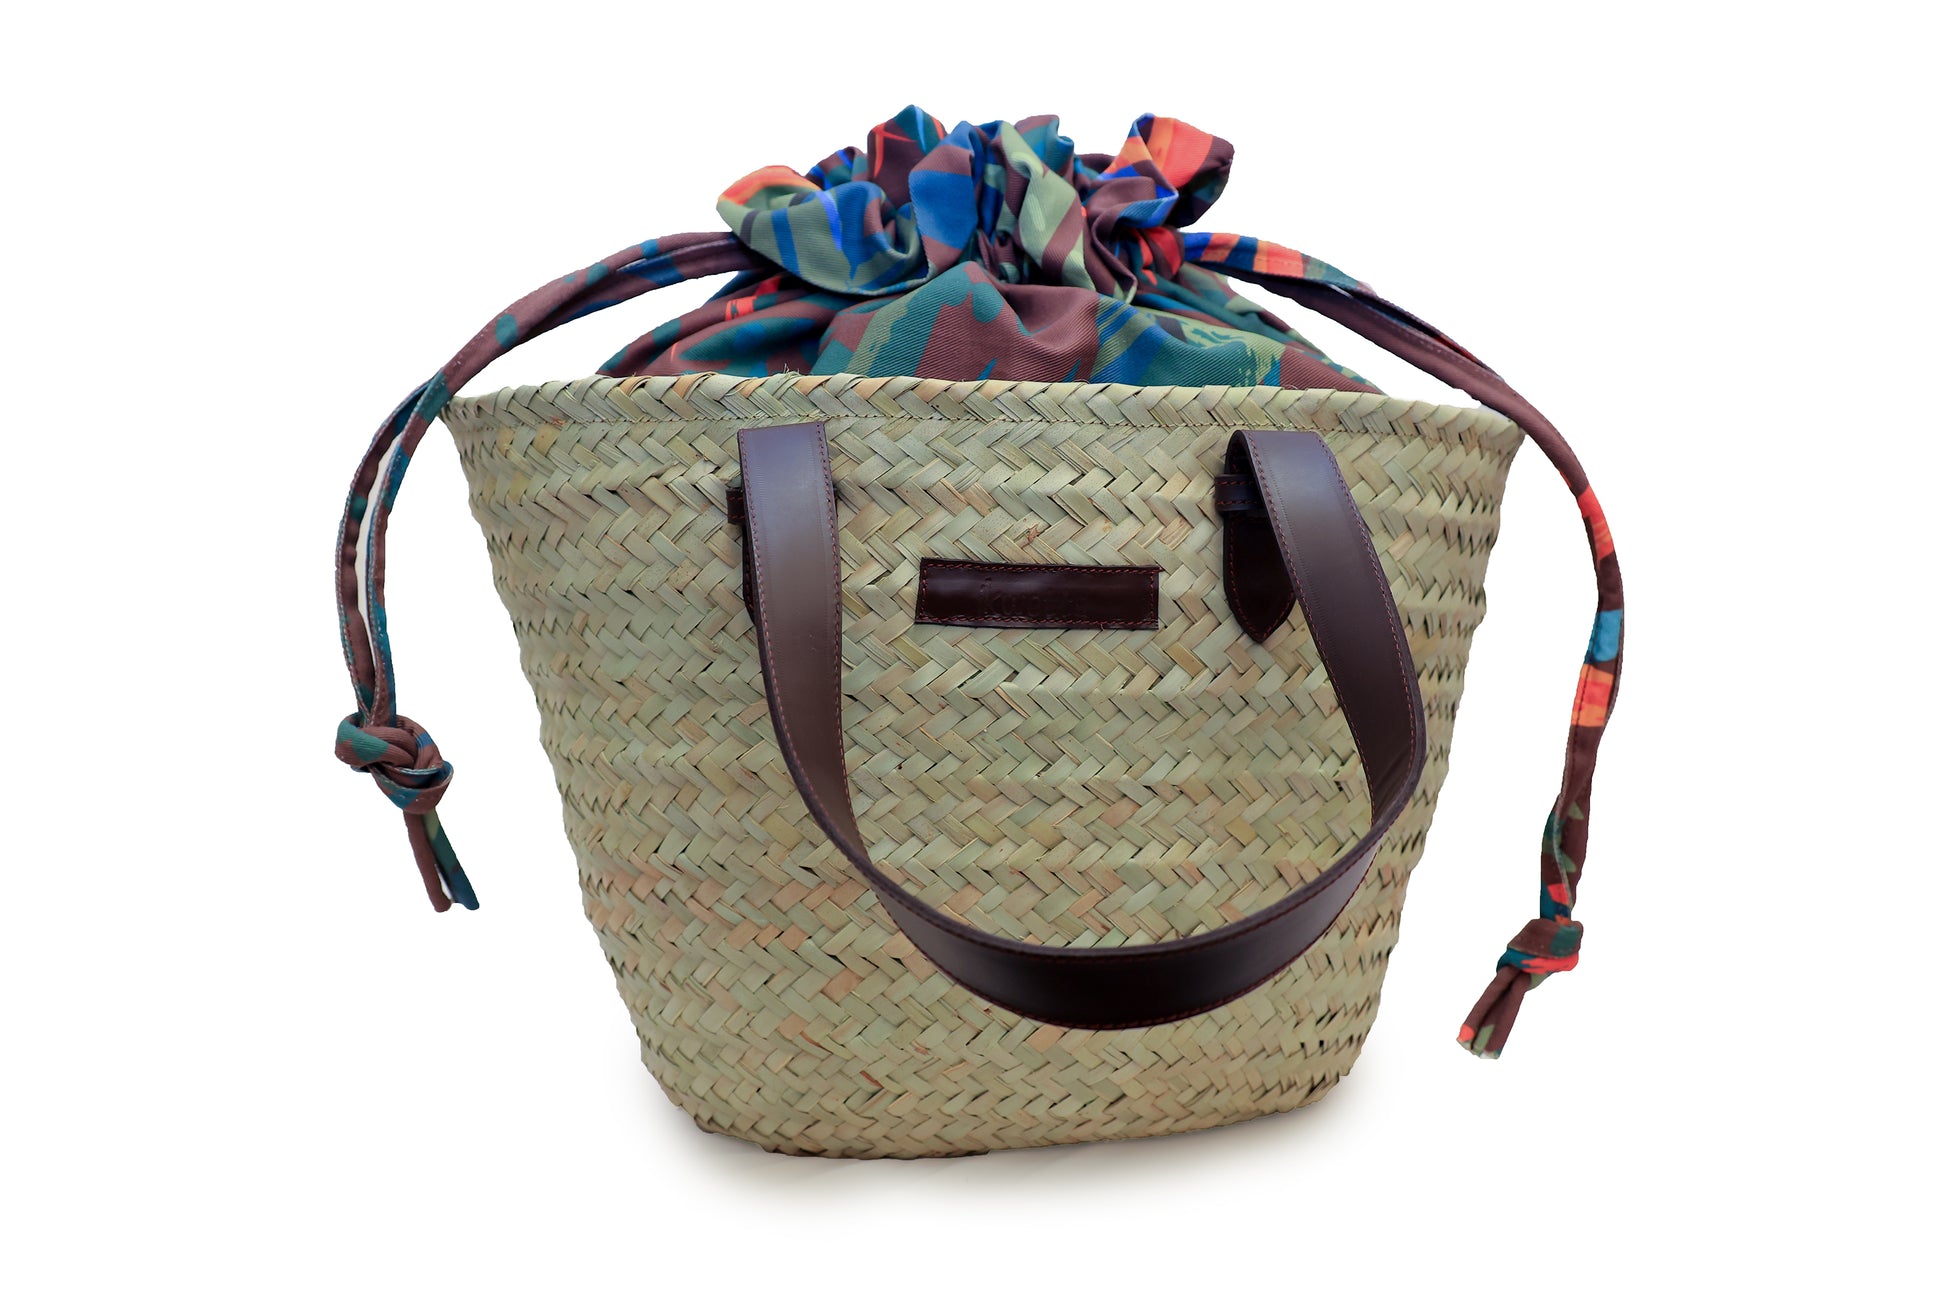 Kapu basket handcrafted with sisal, leather handles and canvas